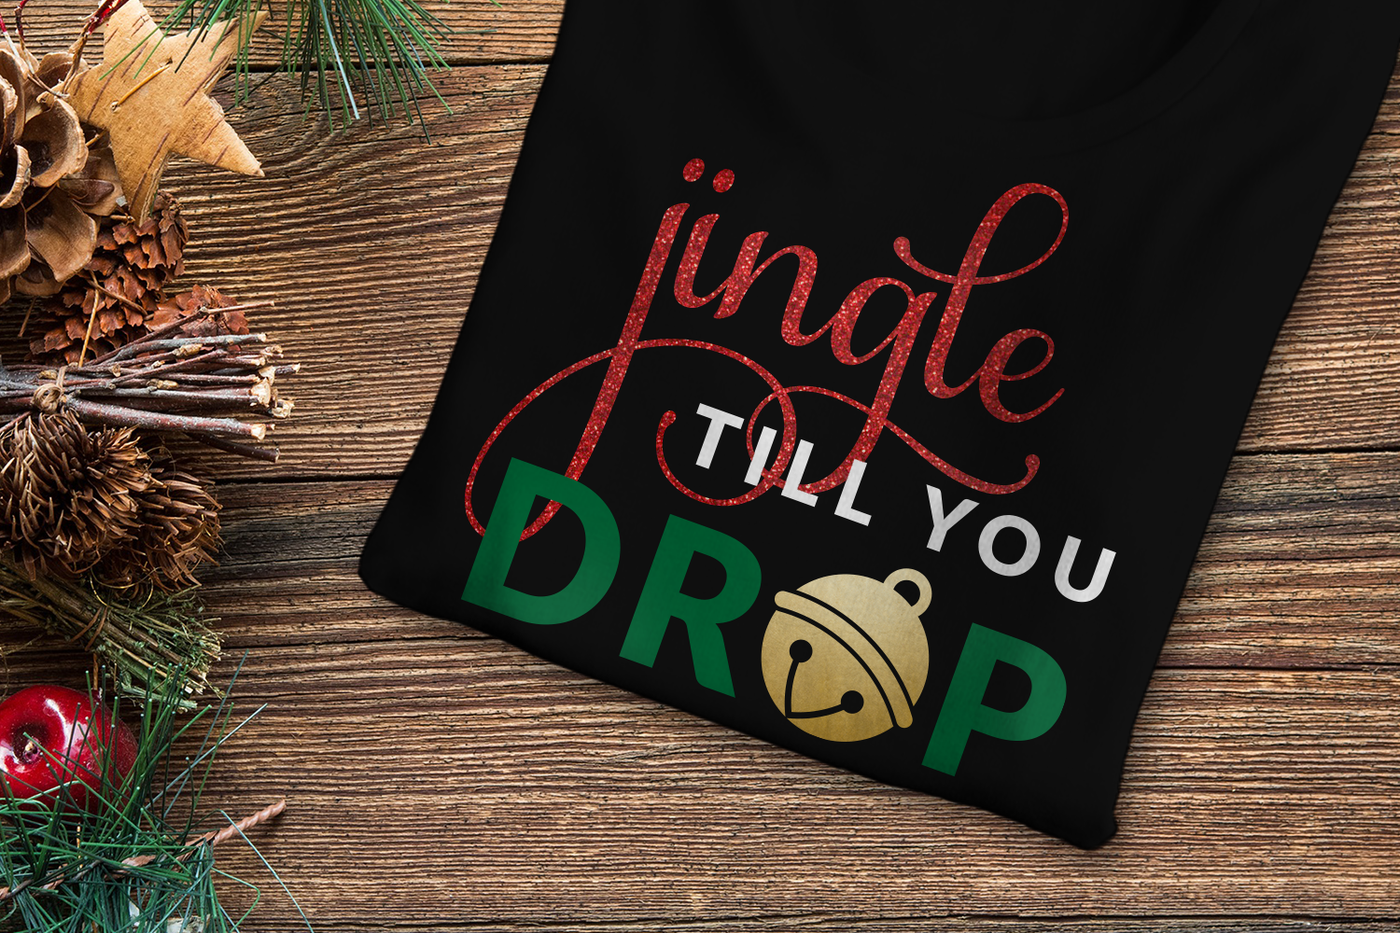 Black folded tee with a design that says "jingle till you drop." There is a round bell in place of the last O.